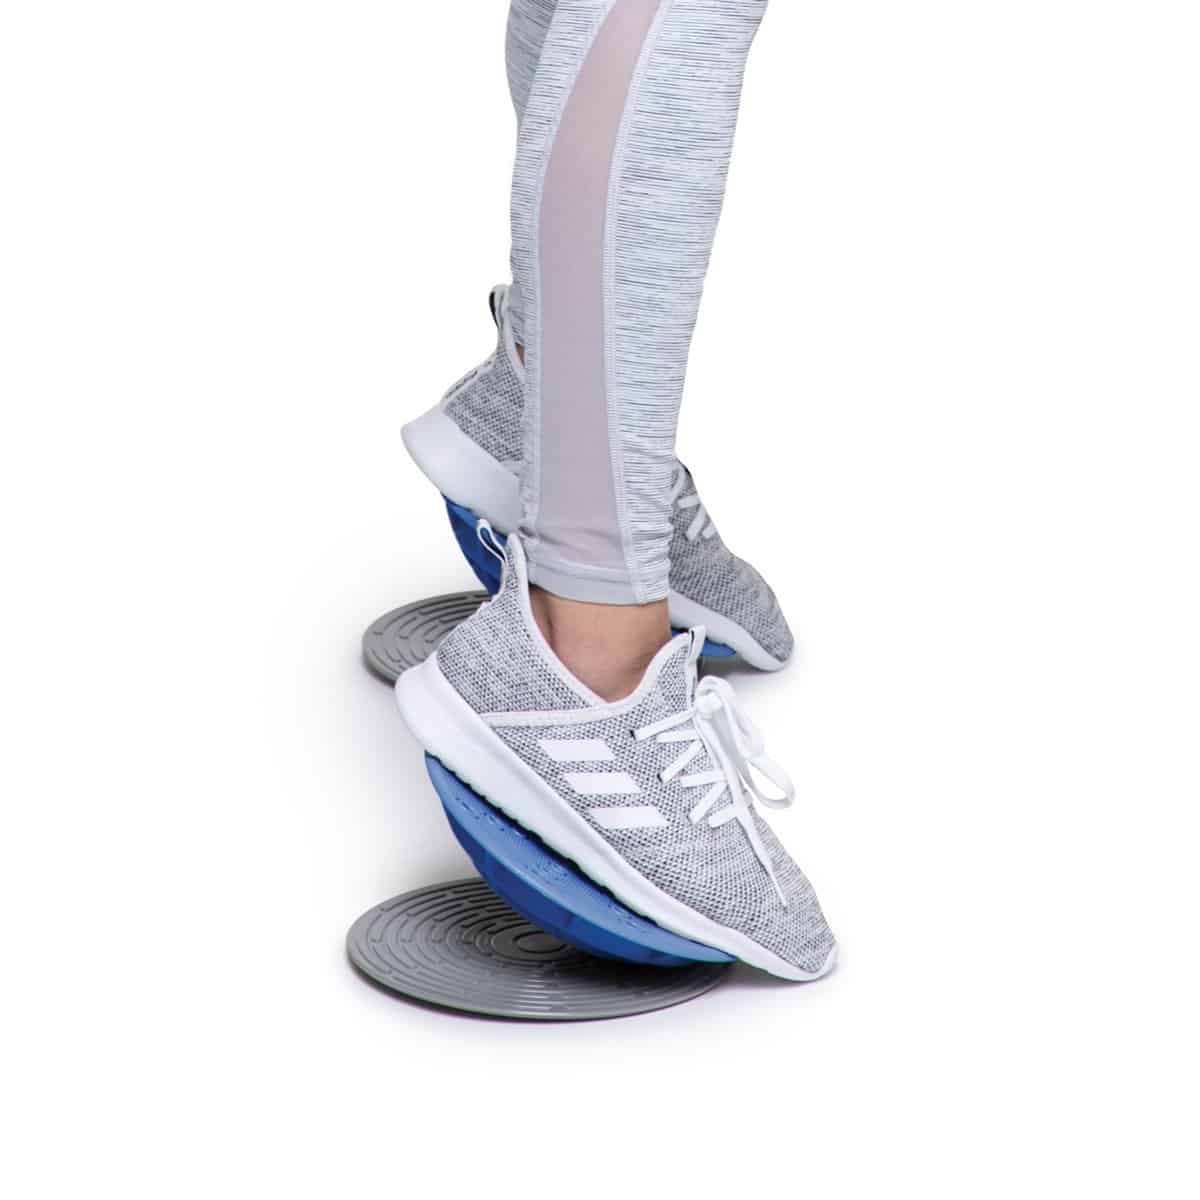 OPTP Dynamic Duo Balance & Stability Trainers - Senior.com Exercise Equipment